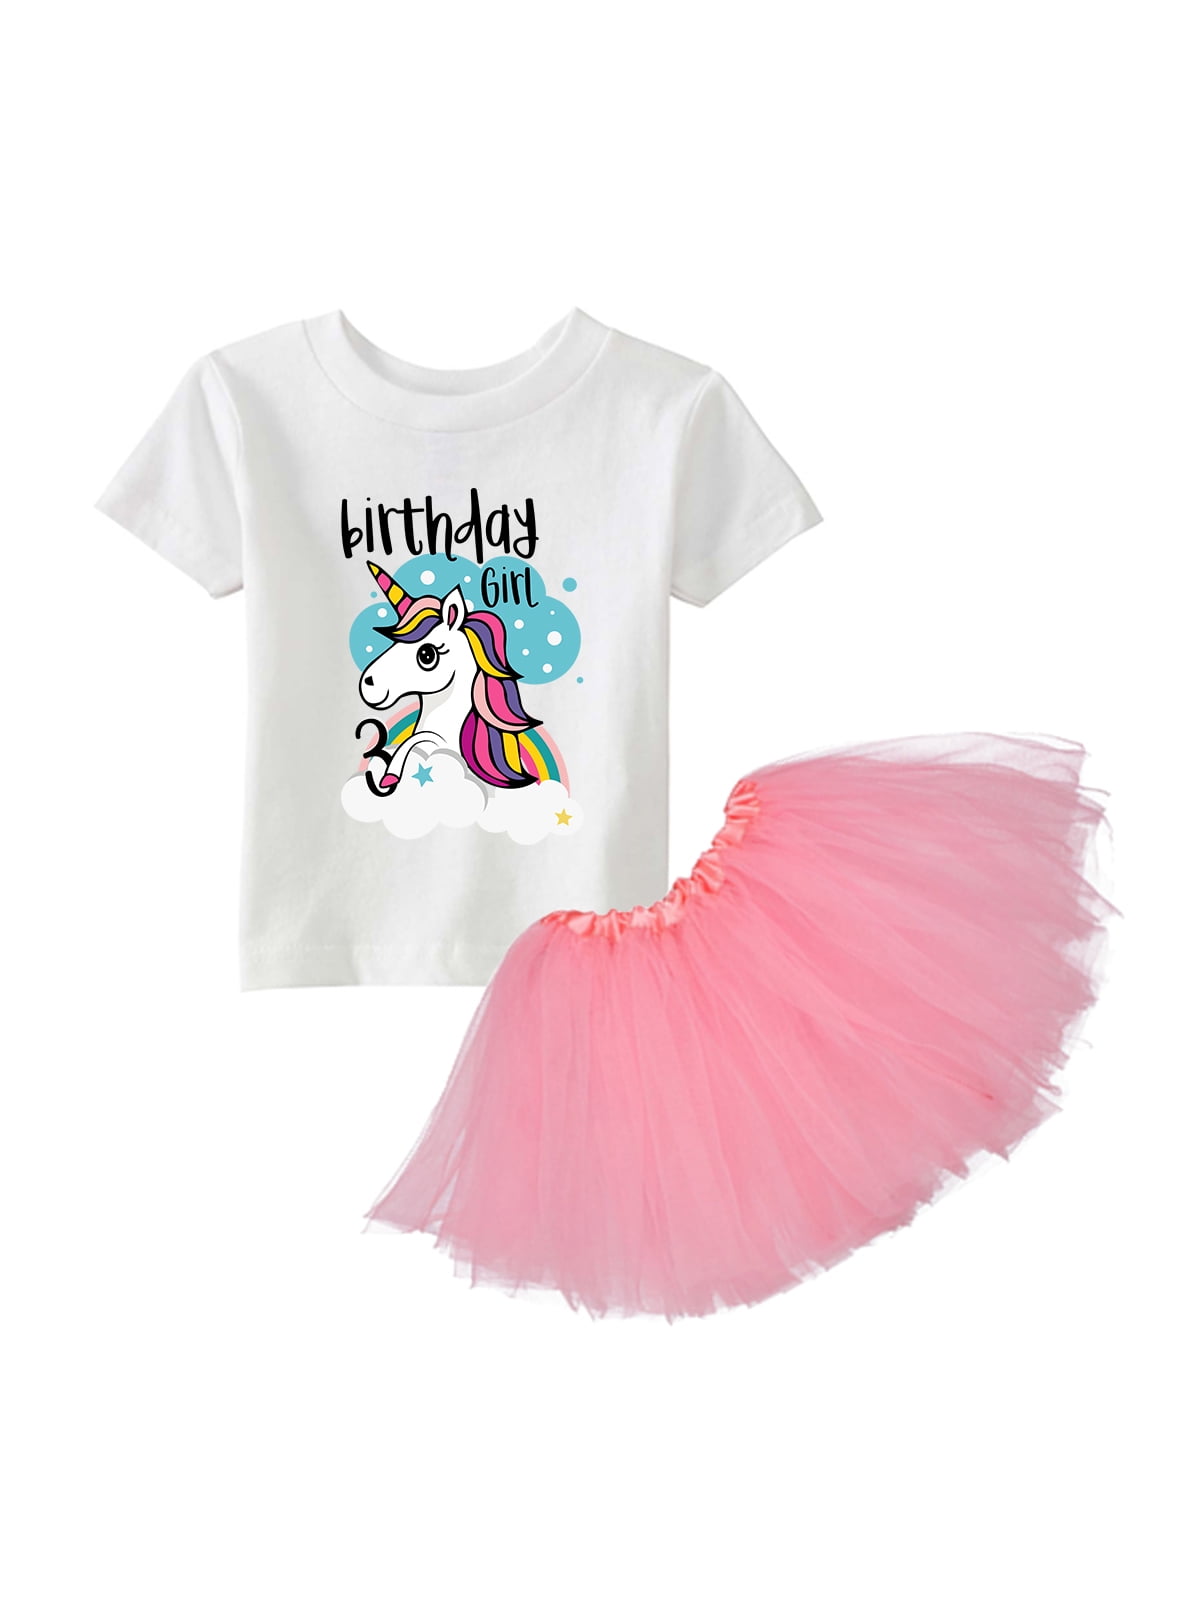 3rd birthday unicorn outfit